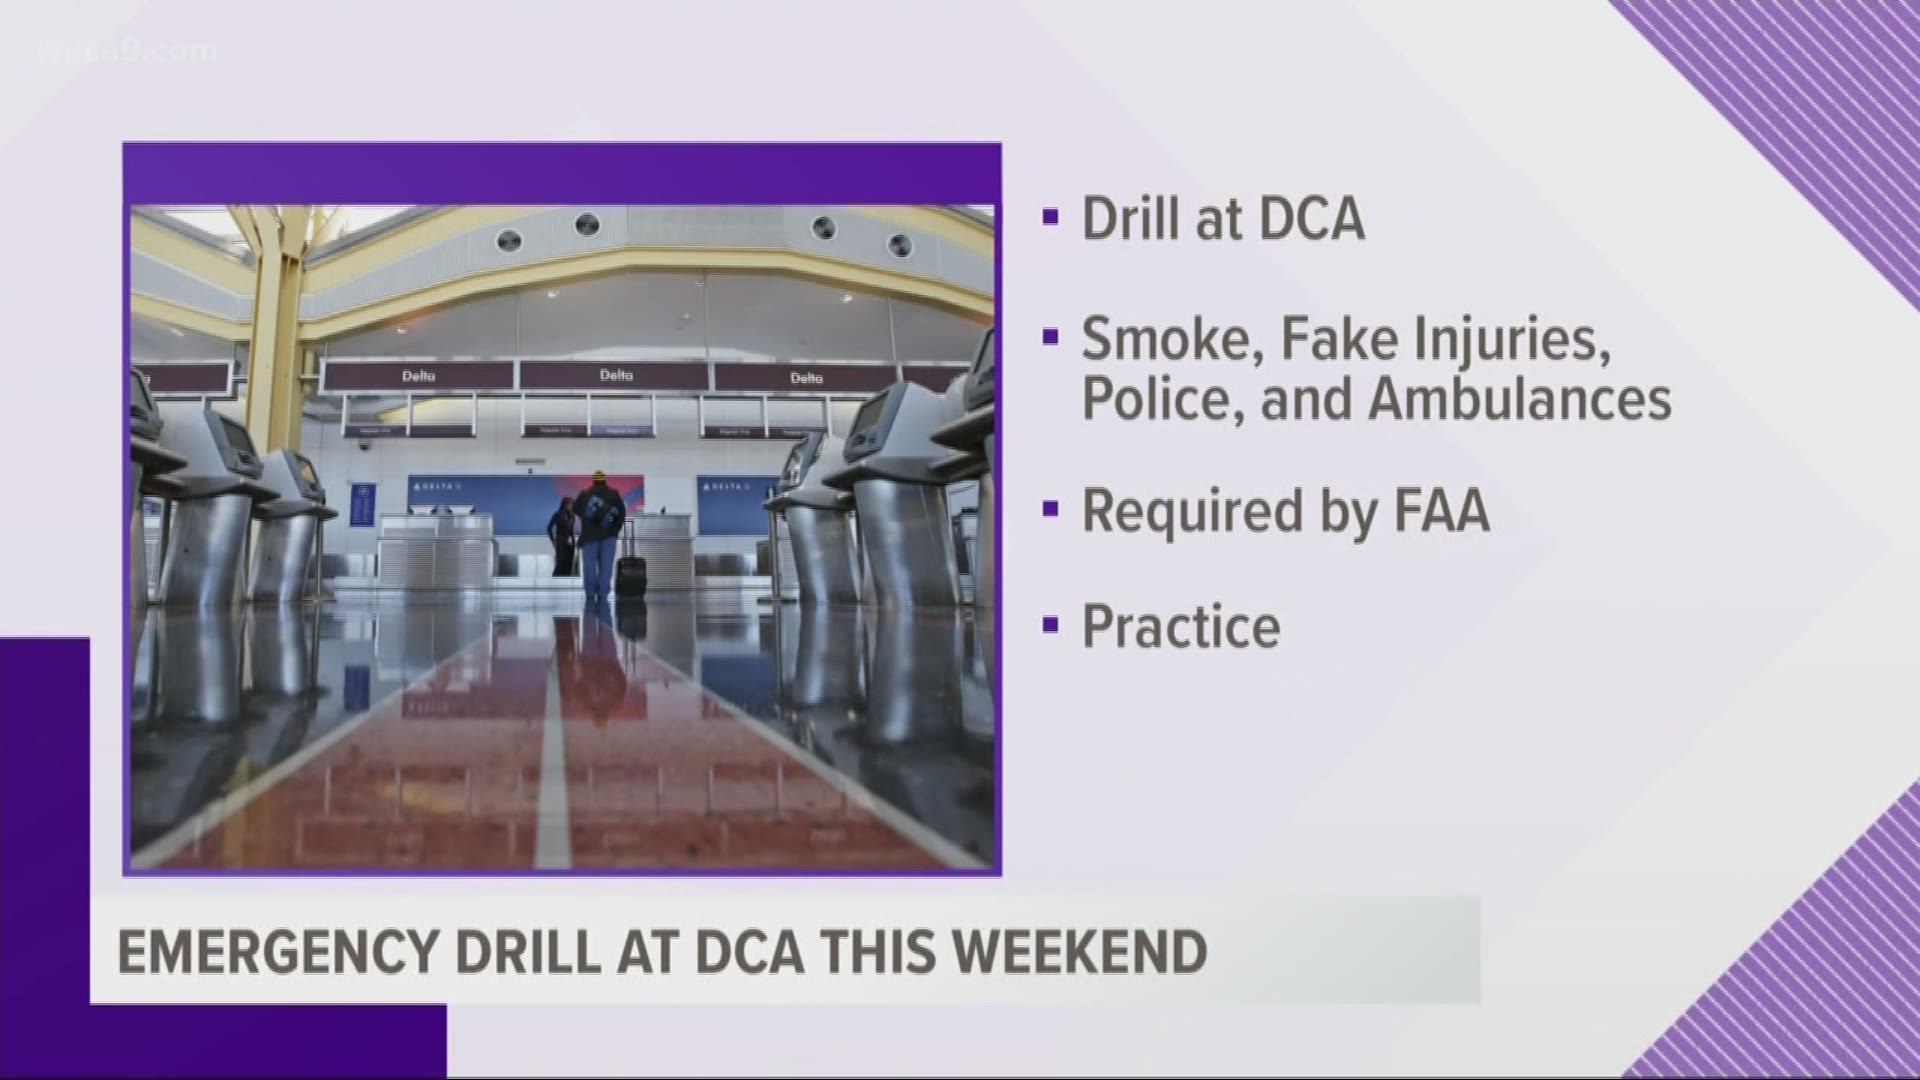 Don't panic - it's just a drill this weekend at Reagan National Airport.